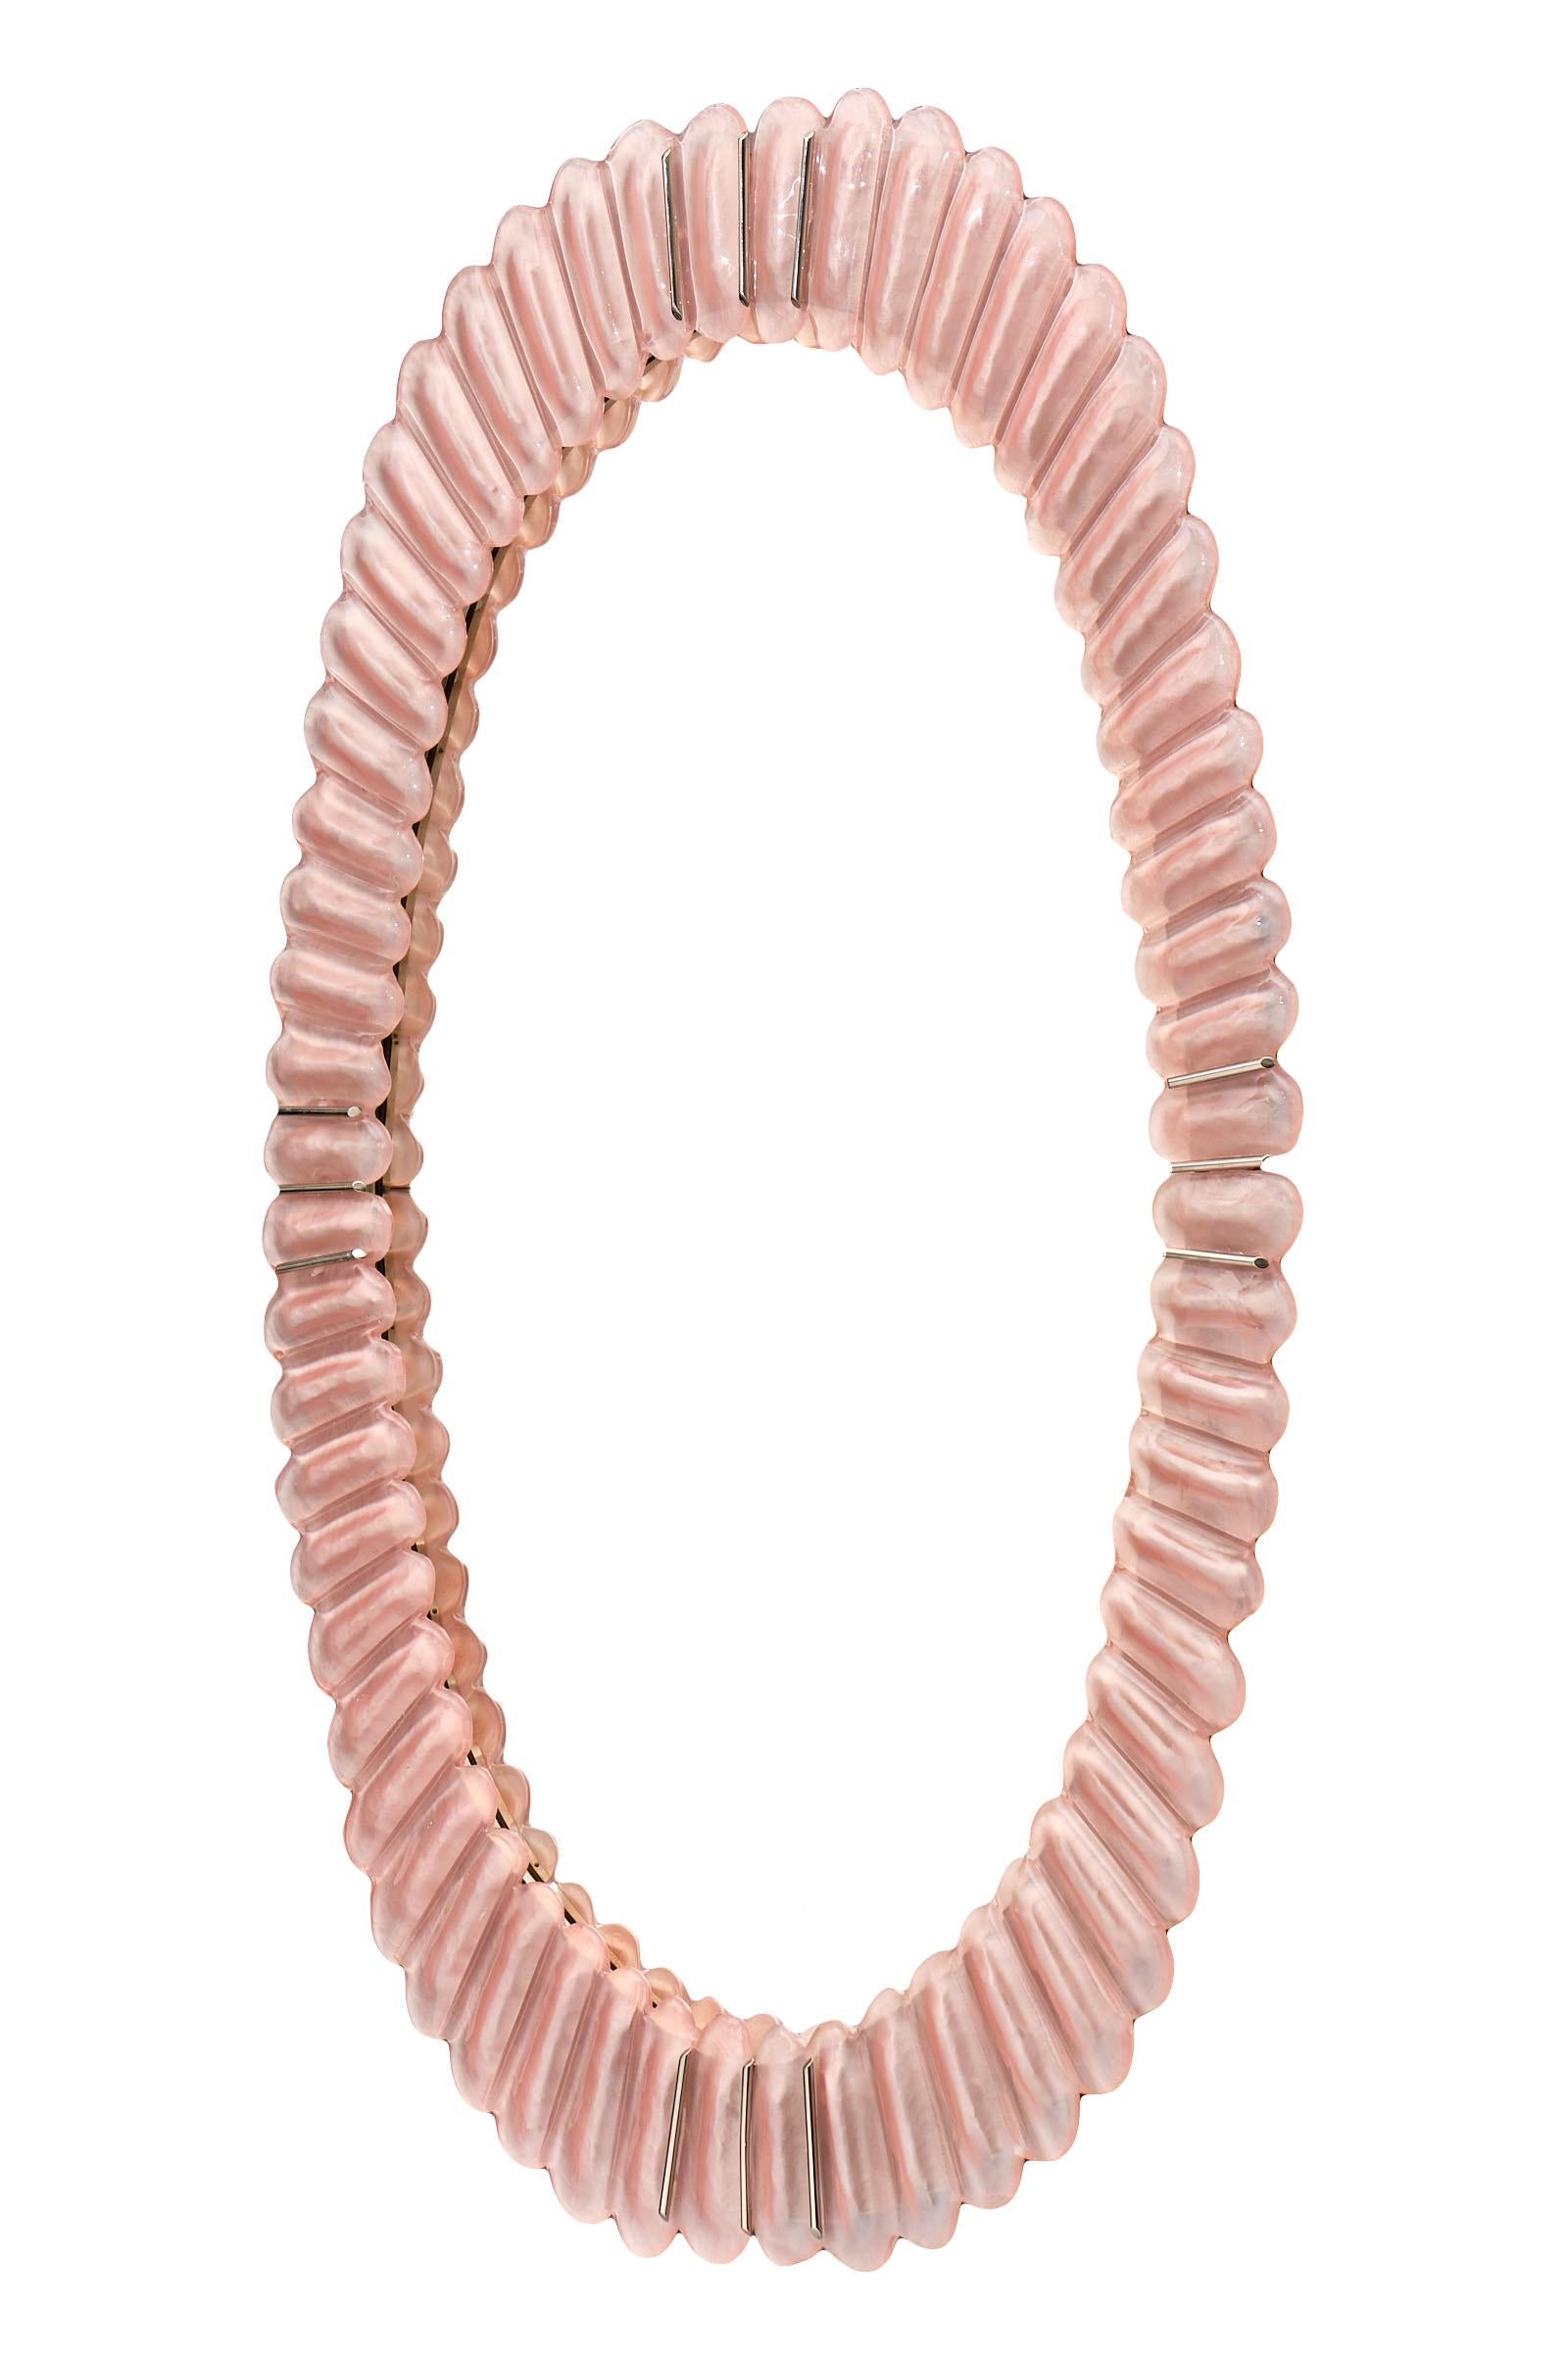 Murano glass pink mirror by Fuga. This Italian piece has hand blown glass elements in the loveliest pink hue. Each oval component is fused together to form a crown, enhancing the decorative impact of these beautiful, organic mirrors. We love the